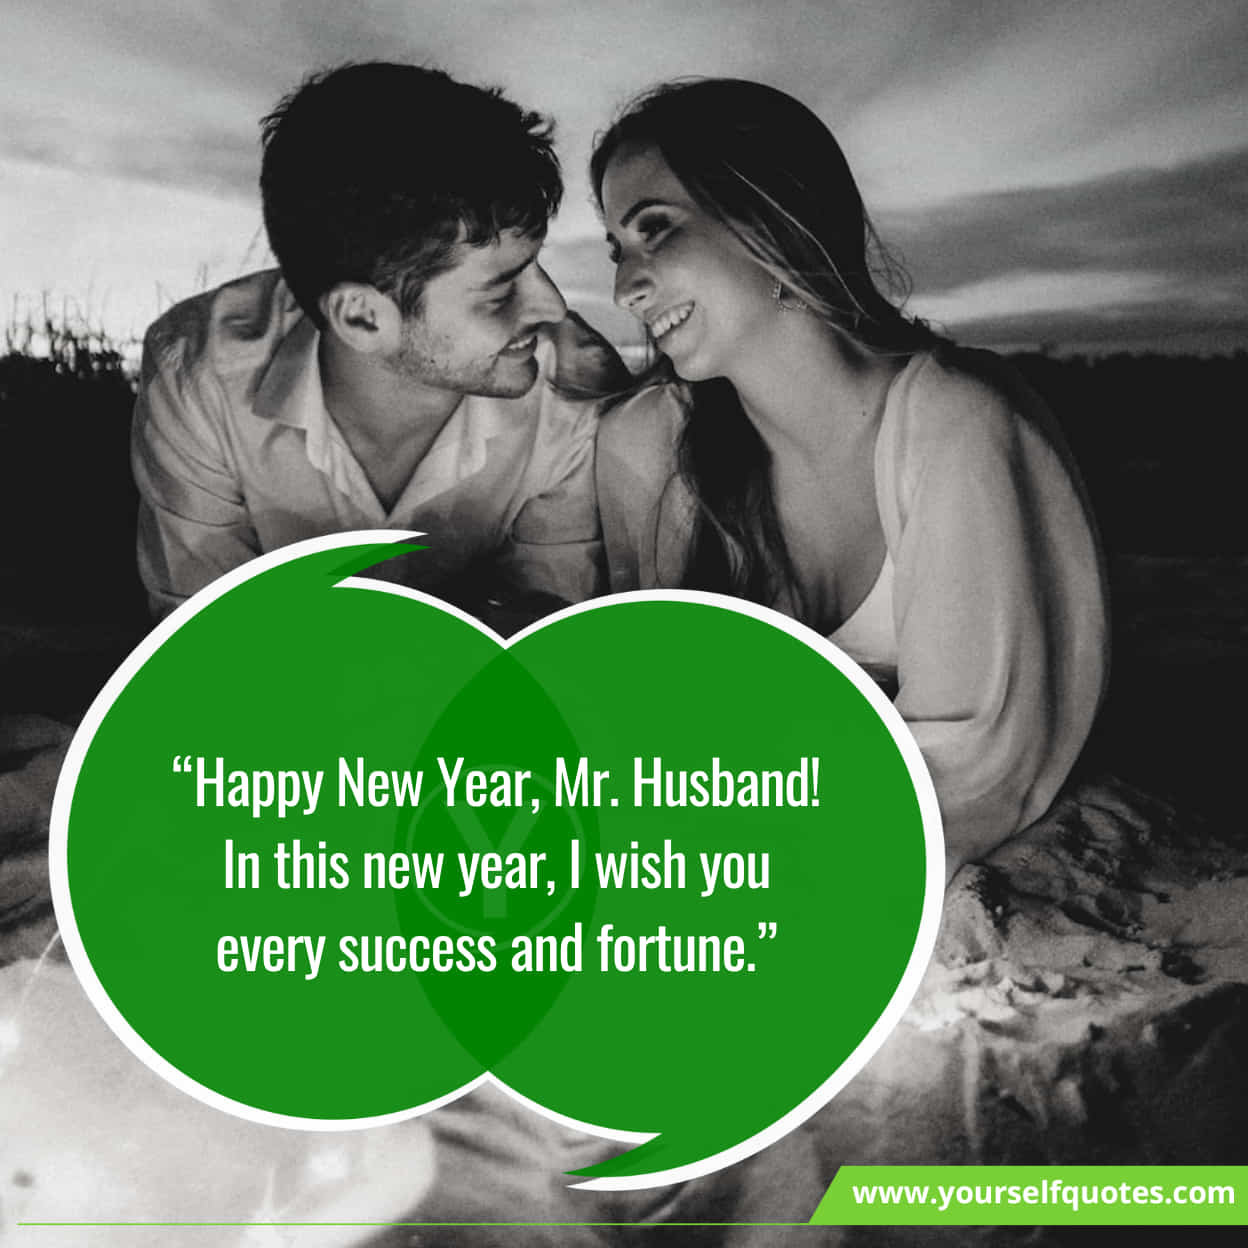 226 New Year Wishes For Husband And Wife To Celebrate Eve